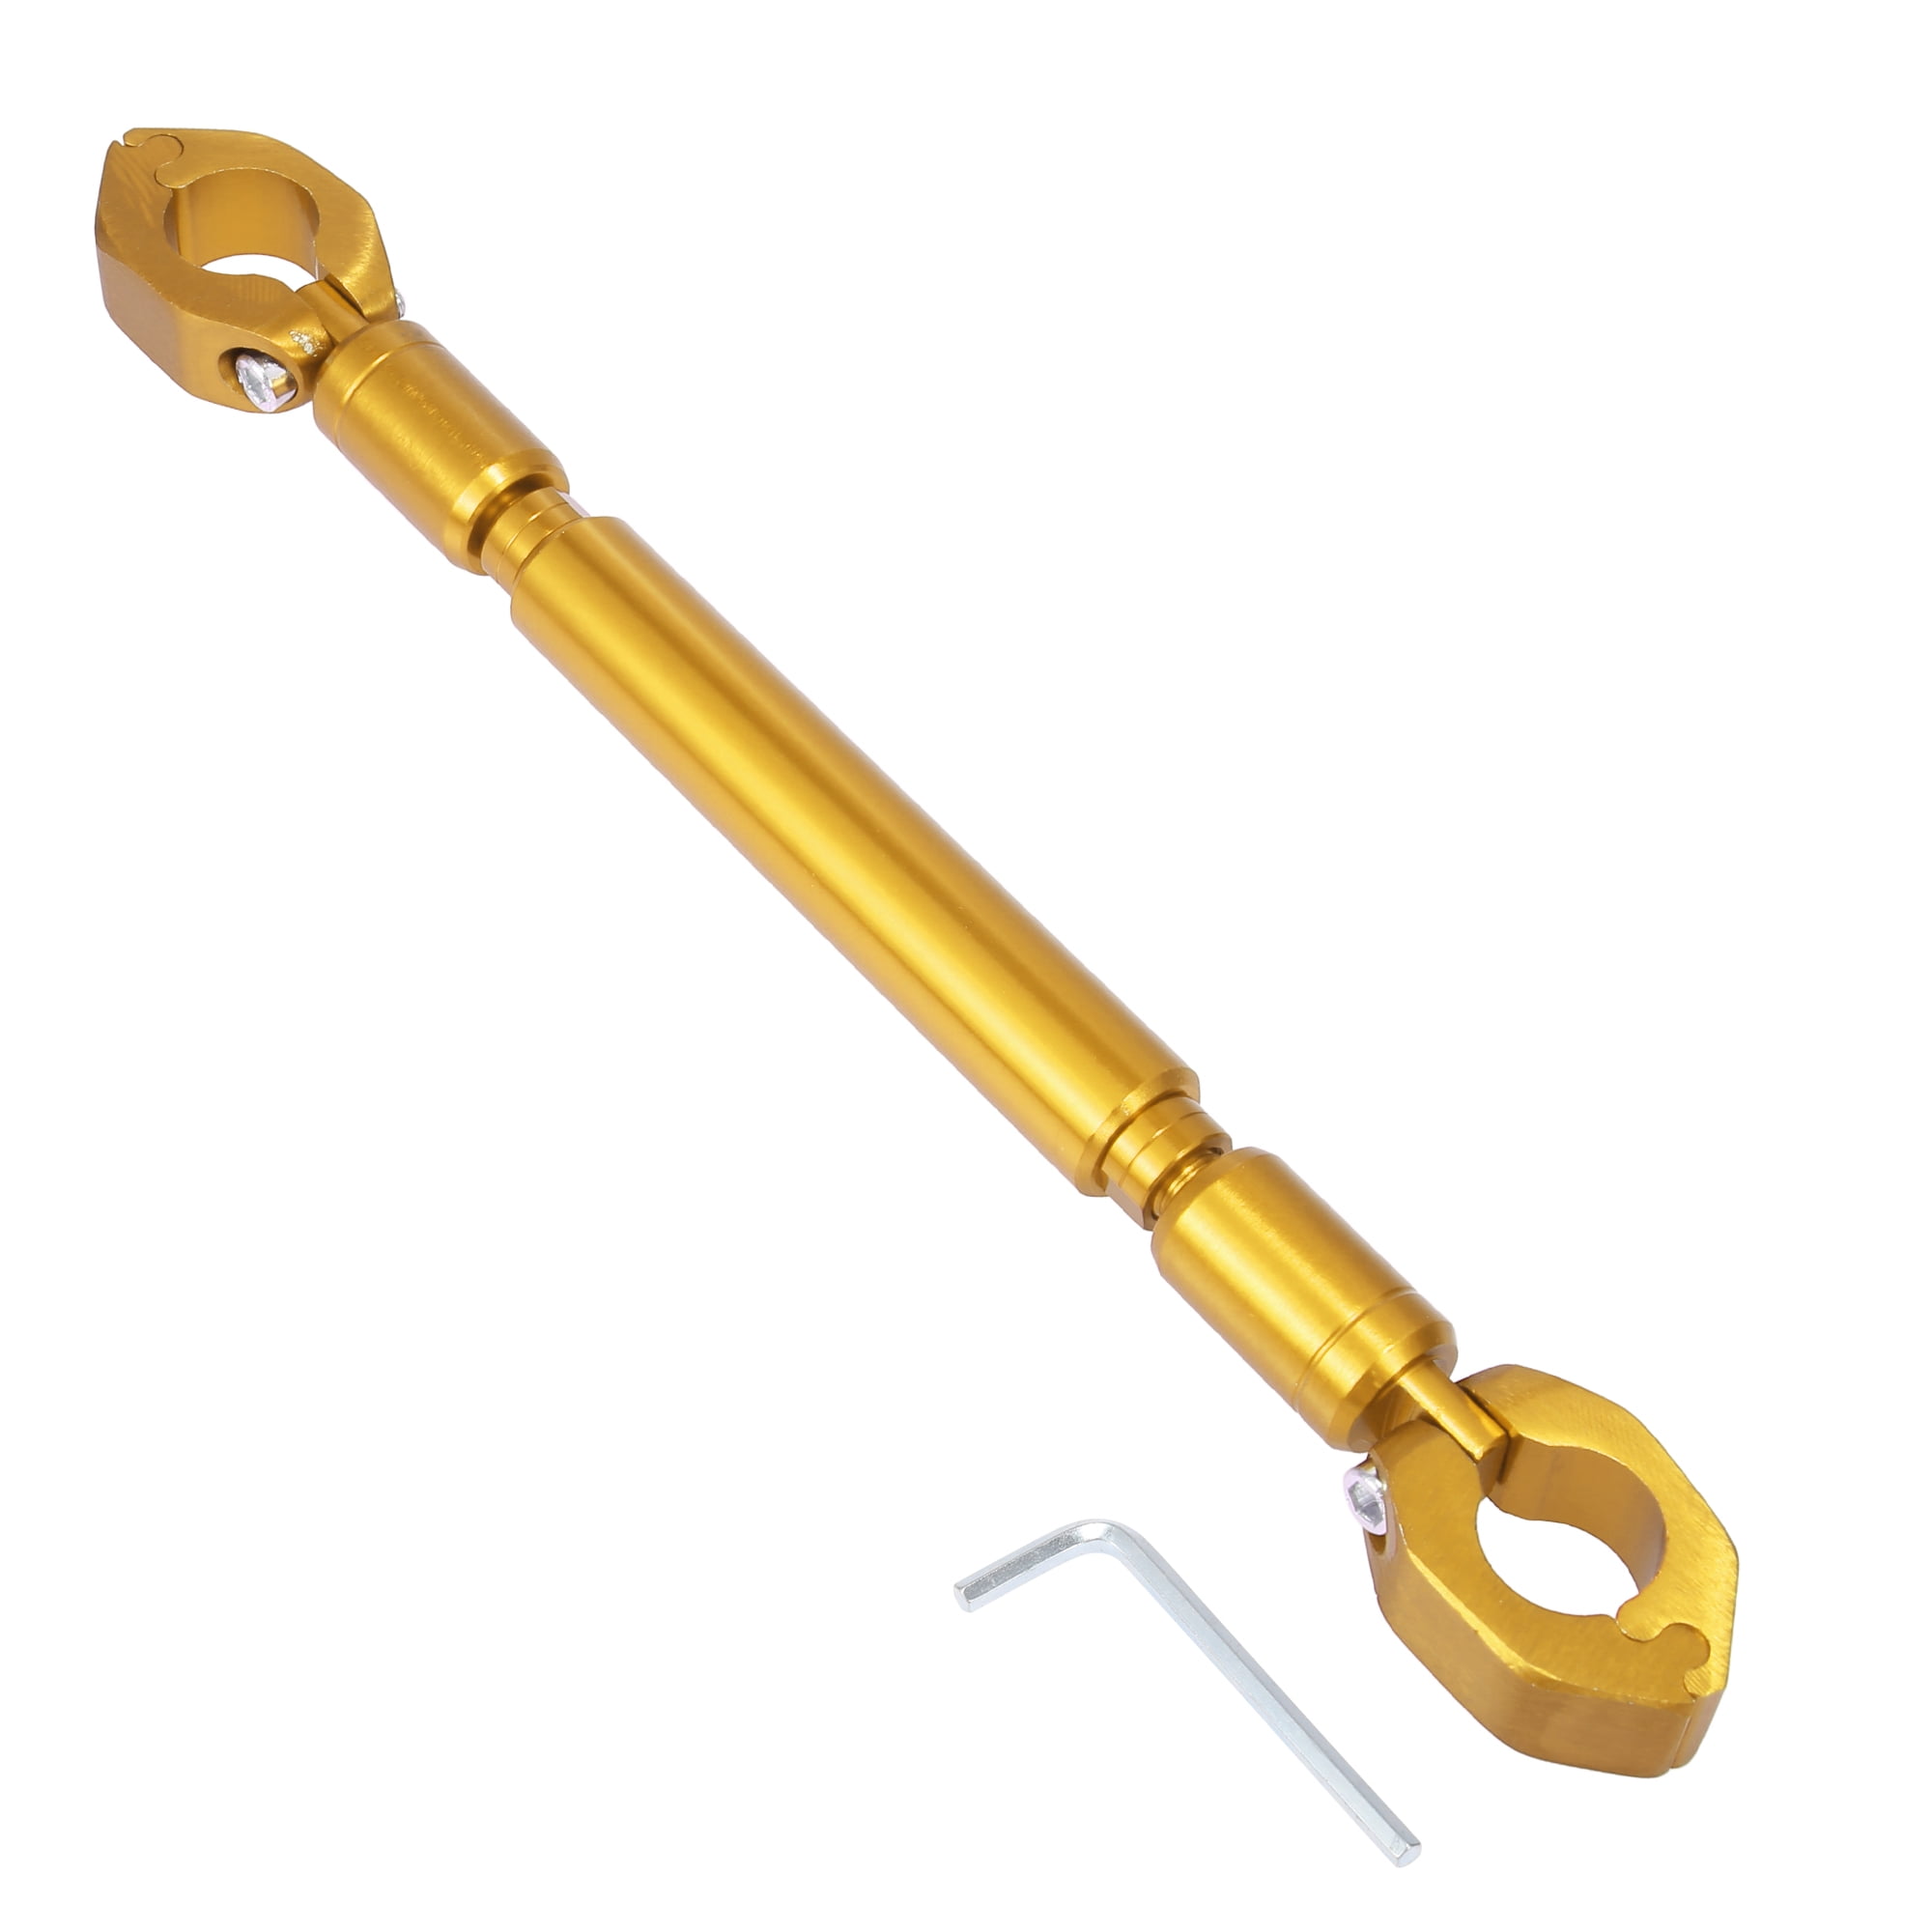 Details about   Universal Motorcycle Brass 1" Handle Bar Support 